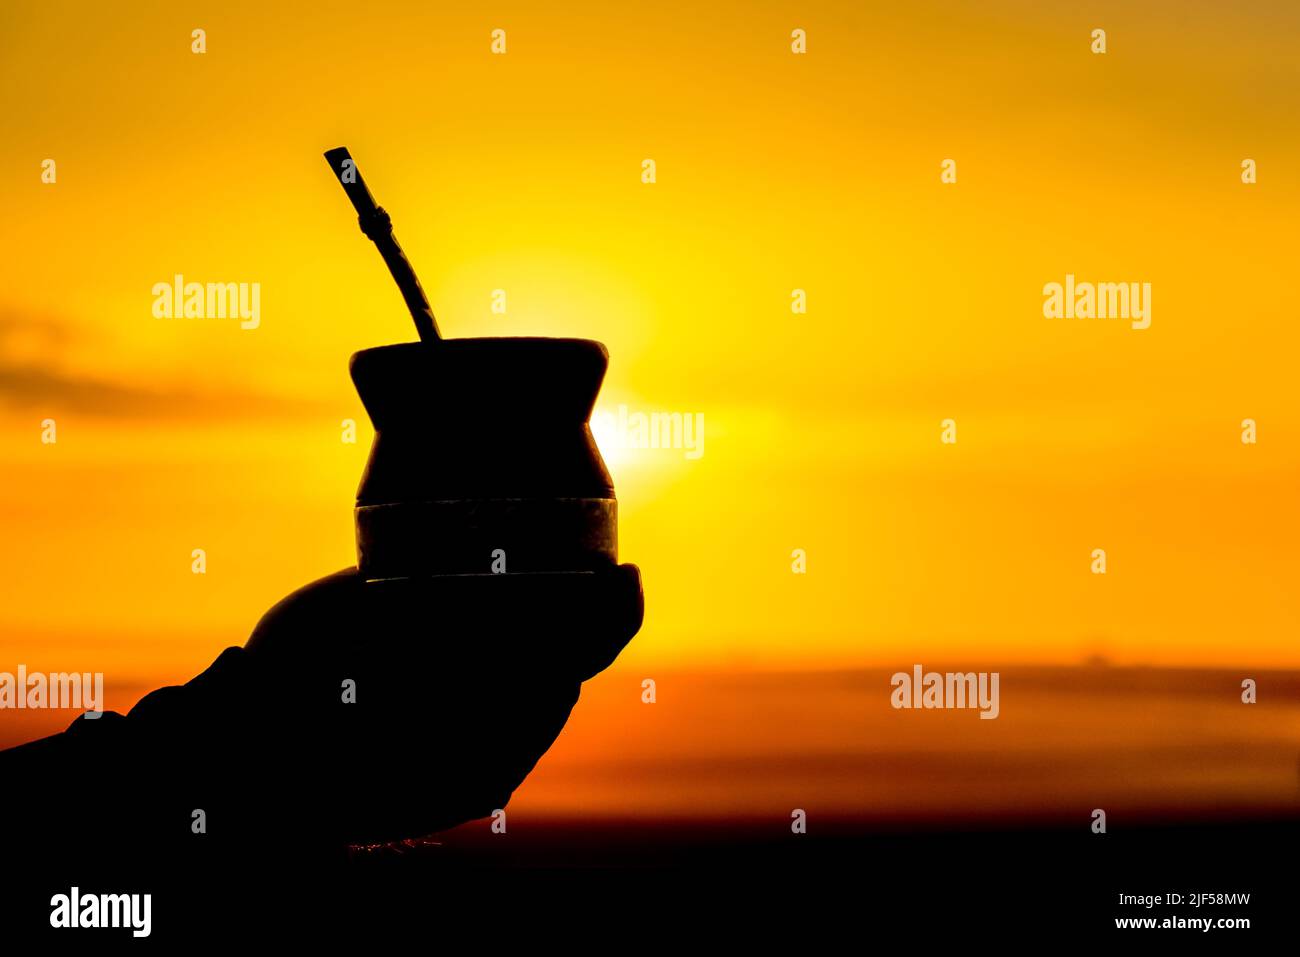 Silhouette of a hand holding a yerba mate drink at golden sunset Stock Photo